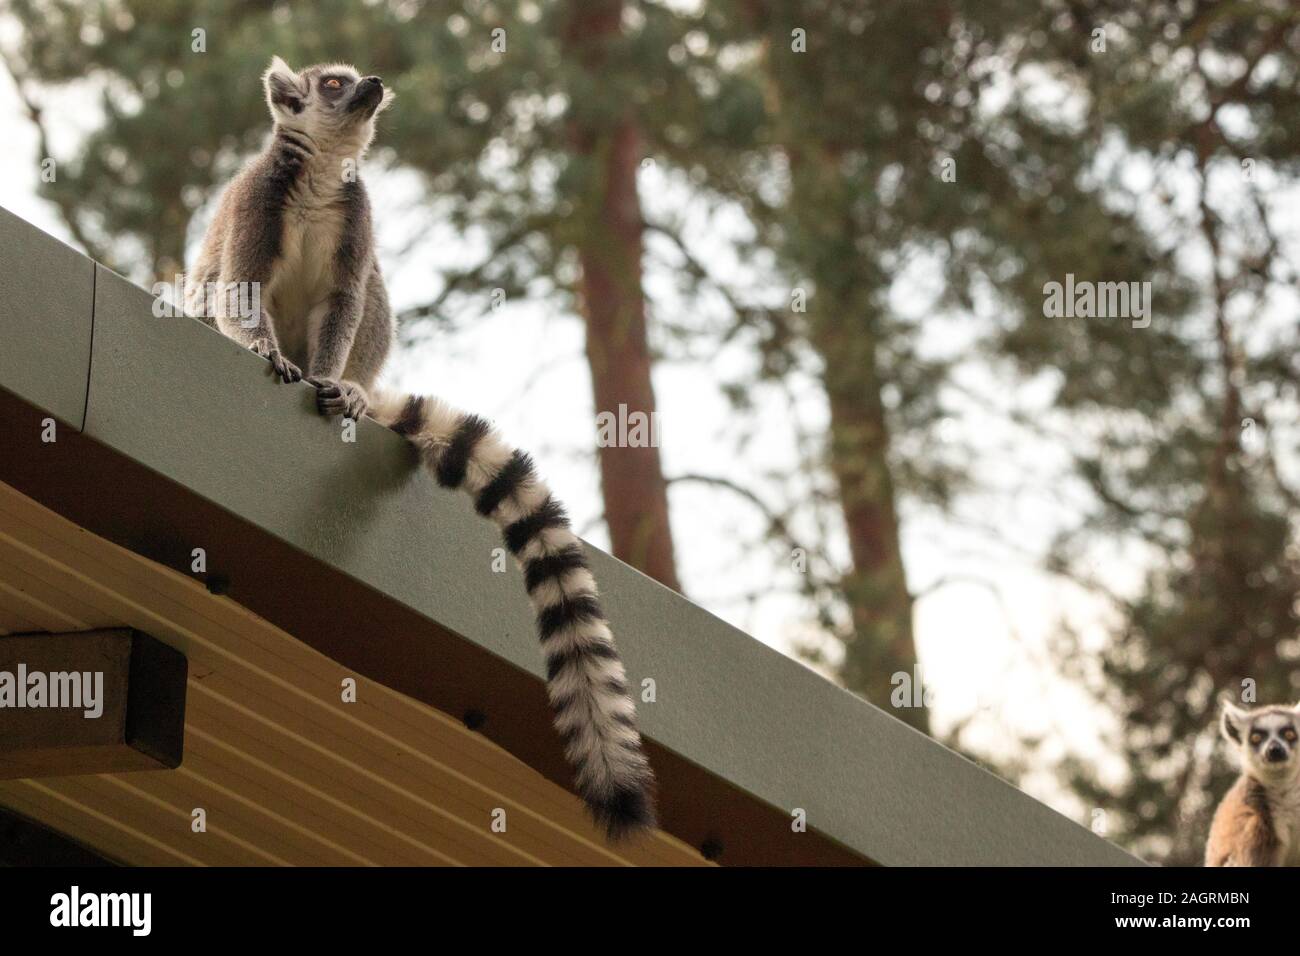 One of the favourite and adorable monkeys around, the Lemur. Stock Photo